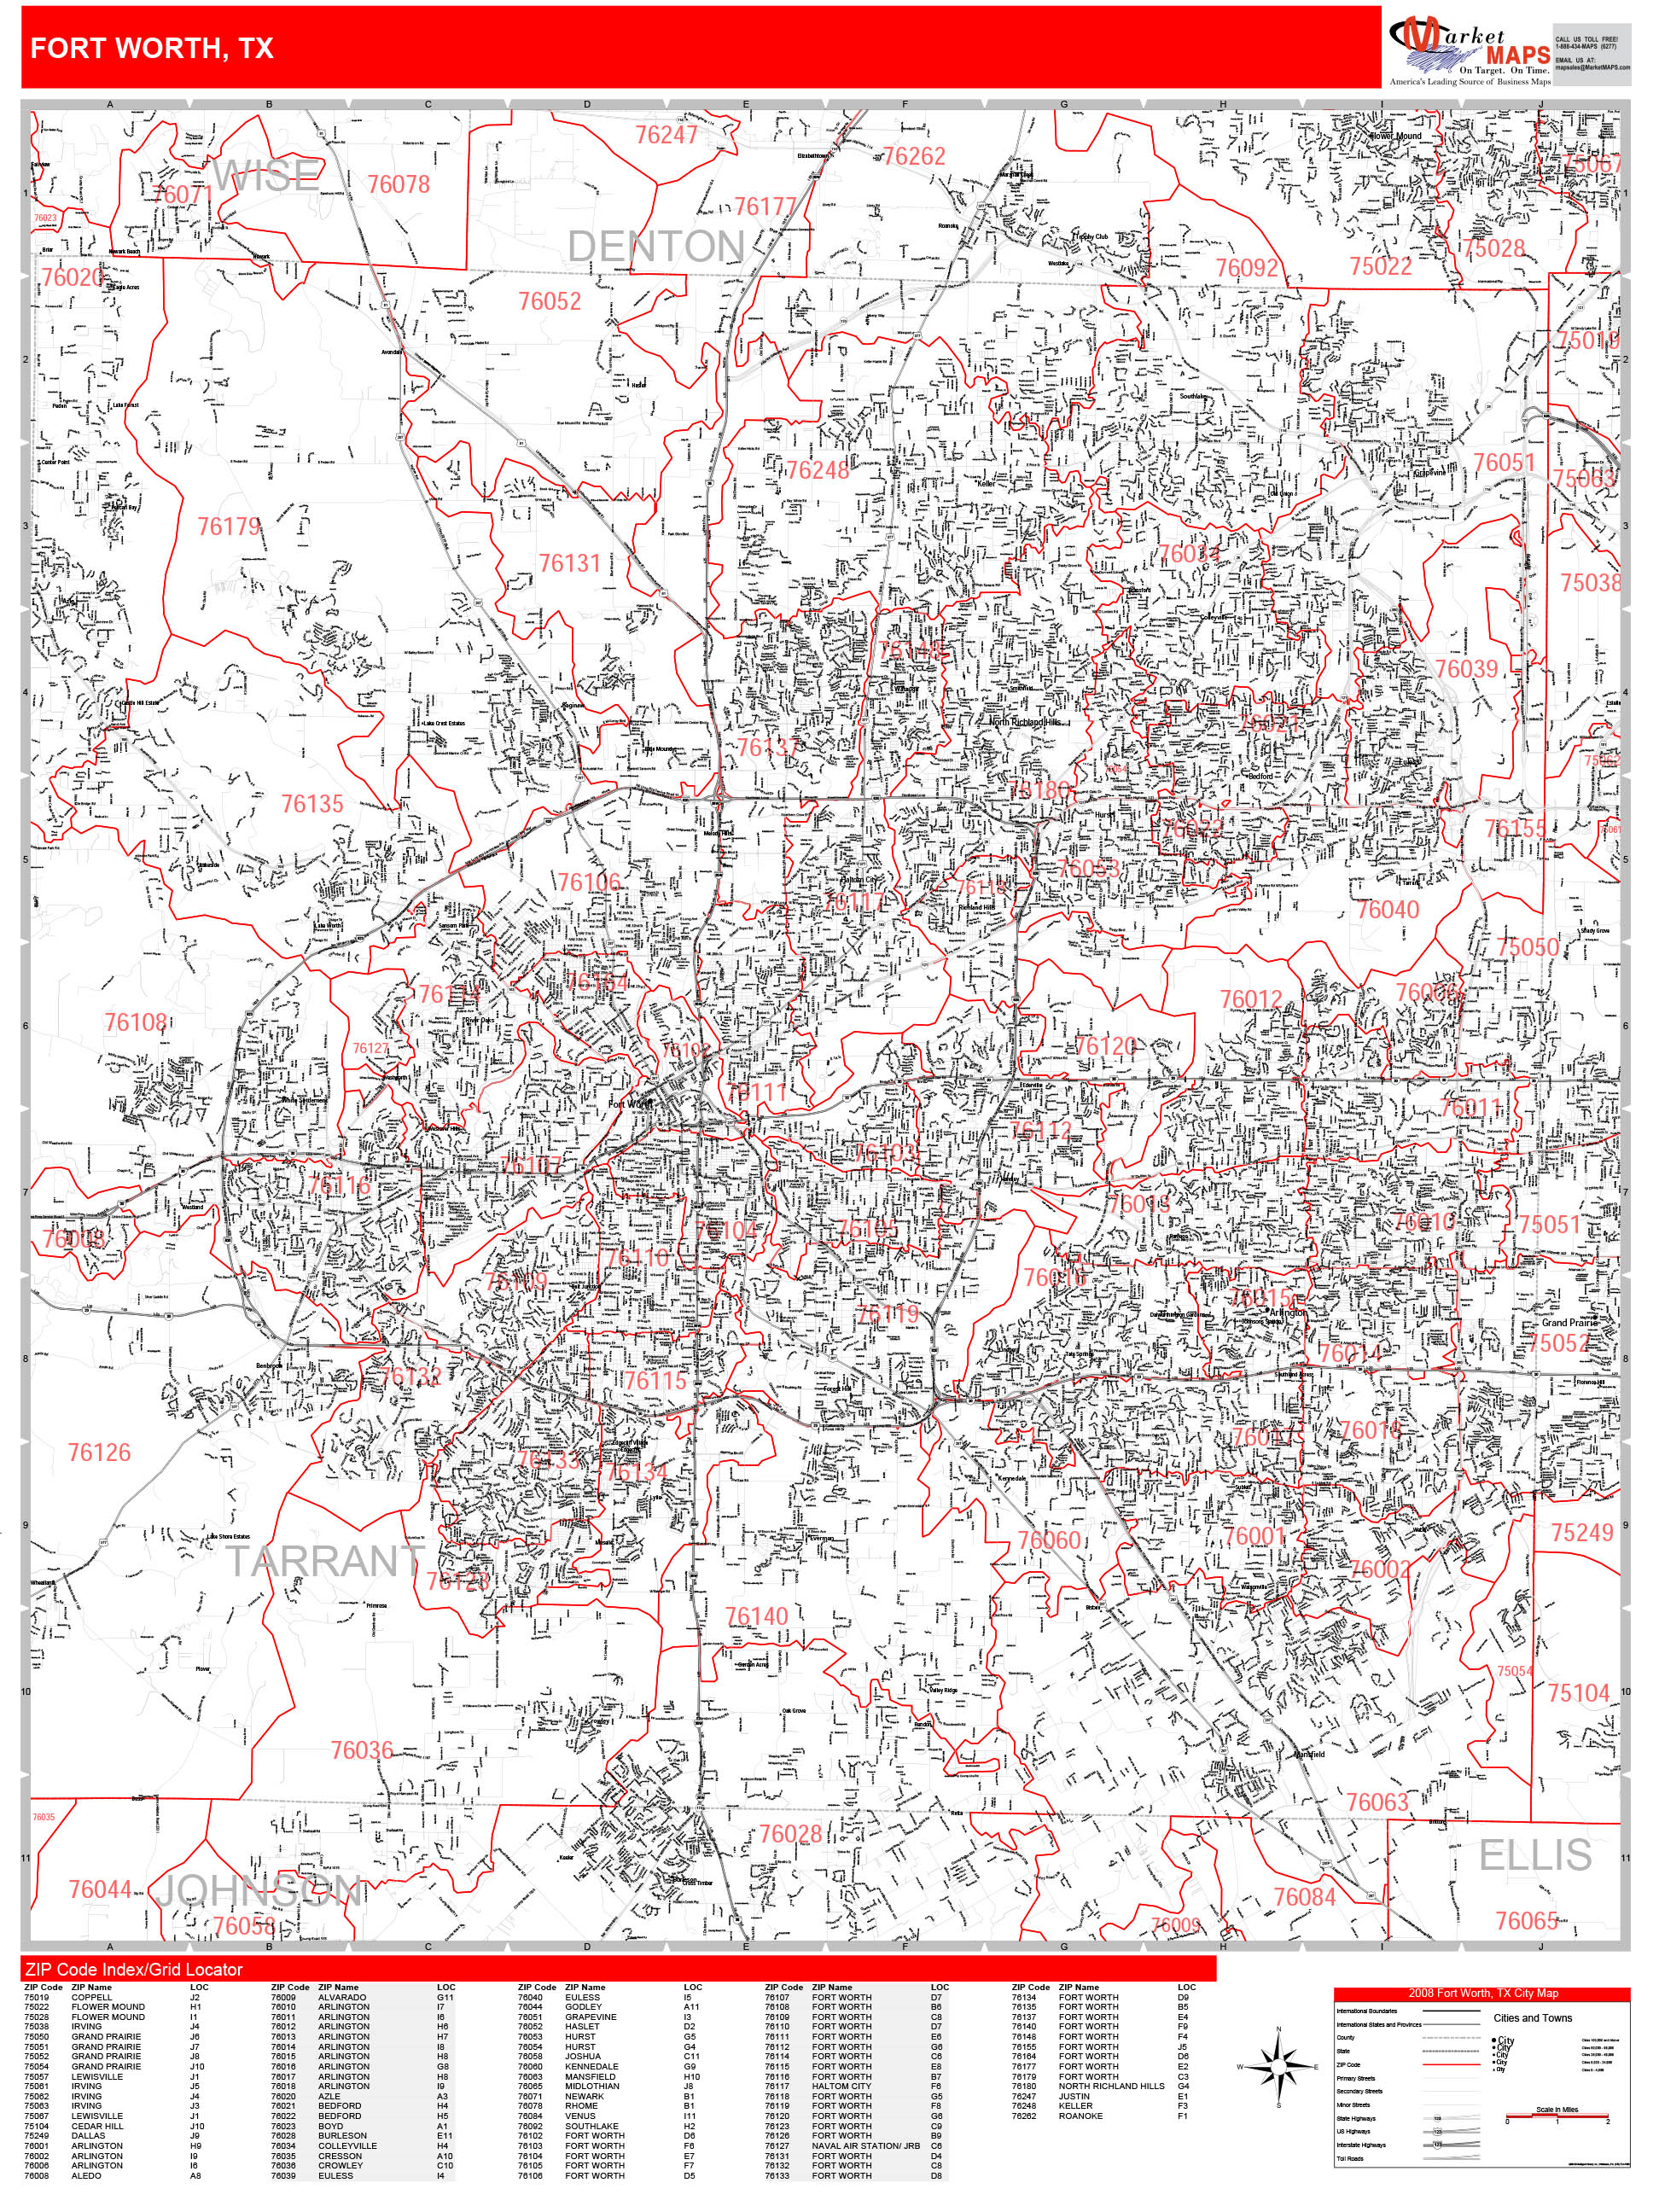 29 Fort Worth Zip Code Map Maps Database Source - vrogue.co